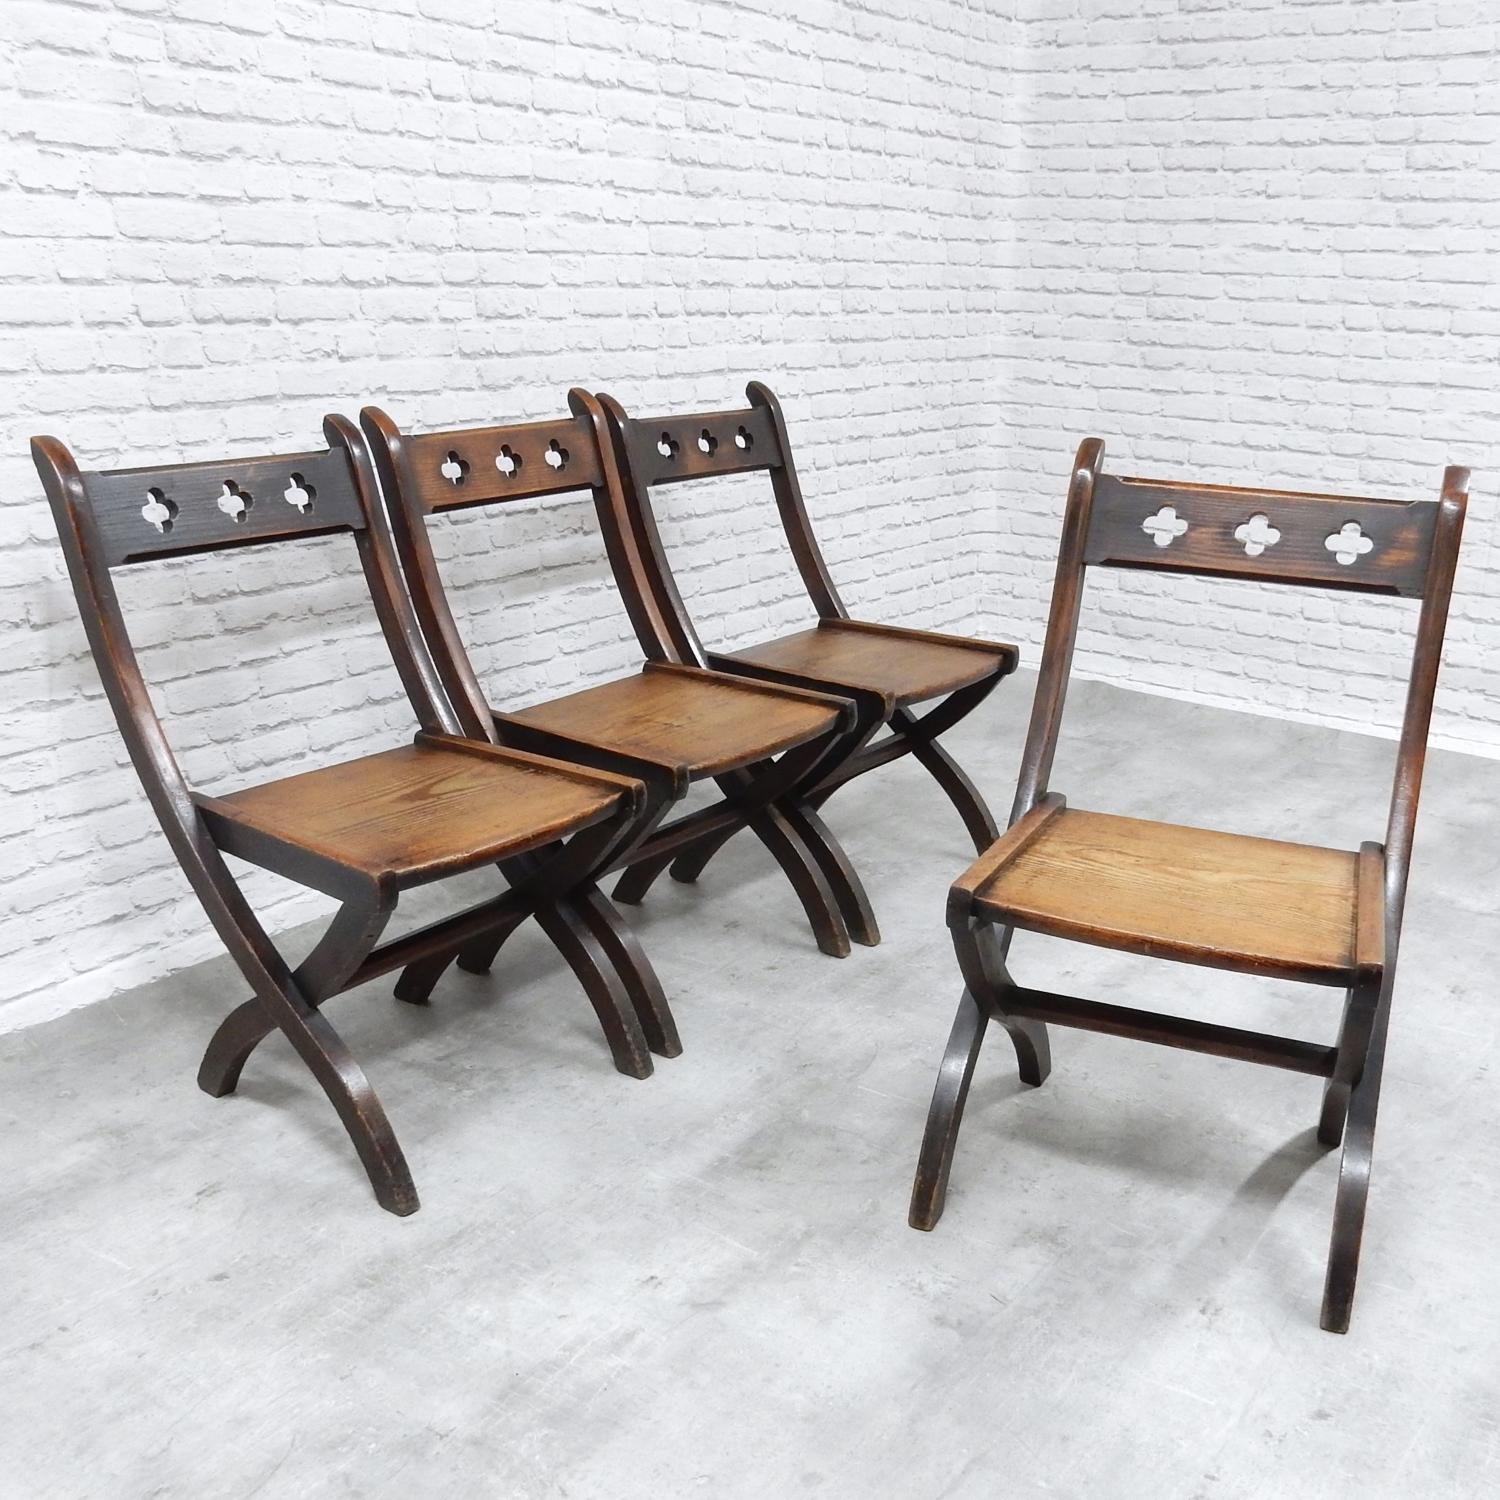 Gothic Revival Chairs